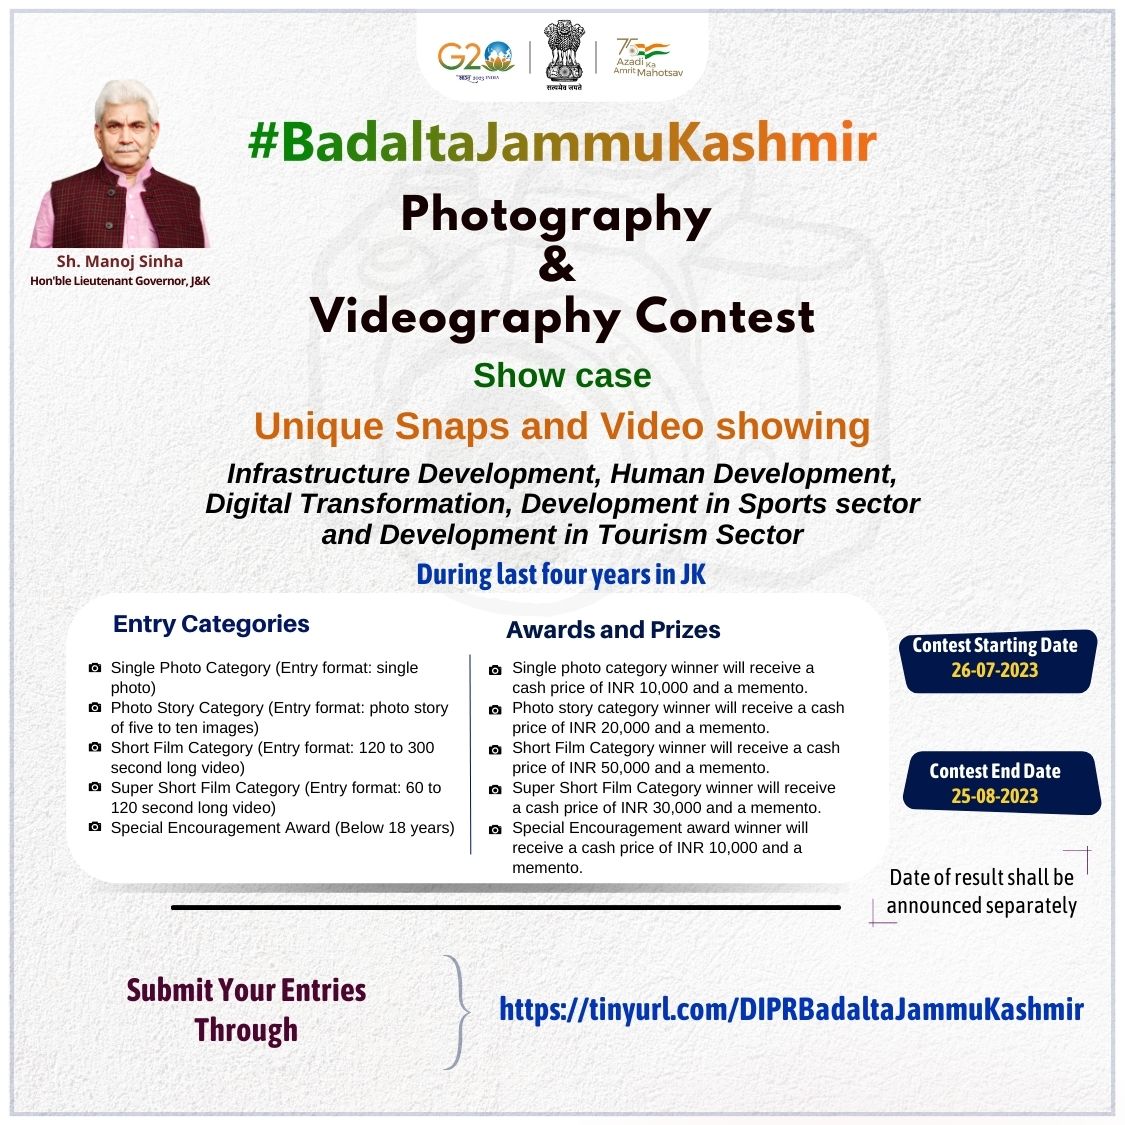 Participate in  #BadaltaJ&k Photo. & Video. Contest to showcase the incredible develp. achiv. in JK! 🏔️ Captr.the essence of progress & prosperity in our region & stand a chance to win amazing prz. 

For more details
jk.mygov.in/task/photo-and…

  #Photography #Videography #BadaltaJK